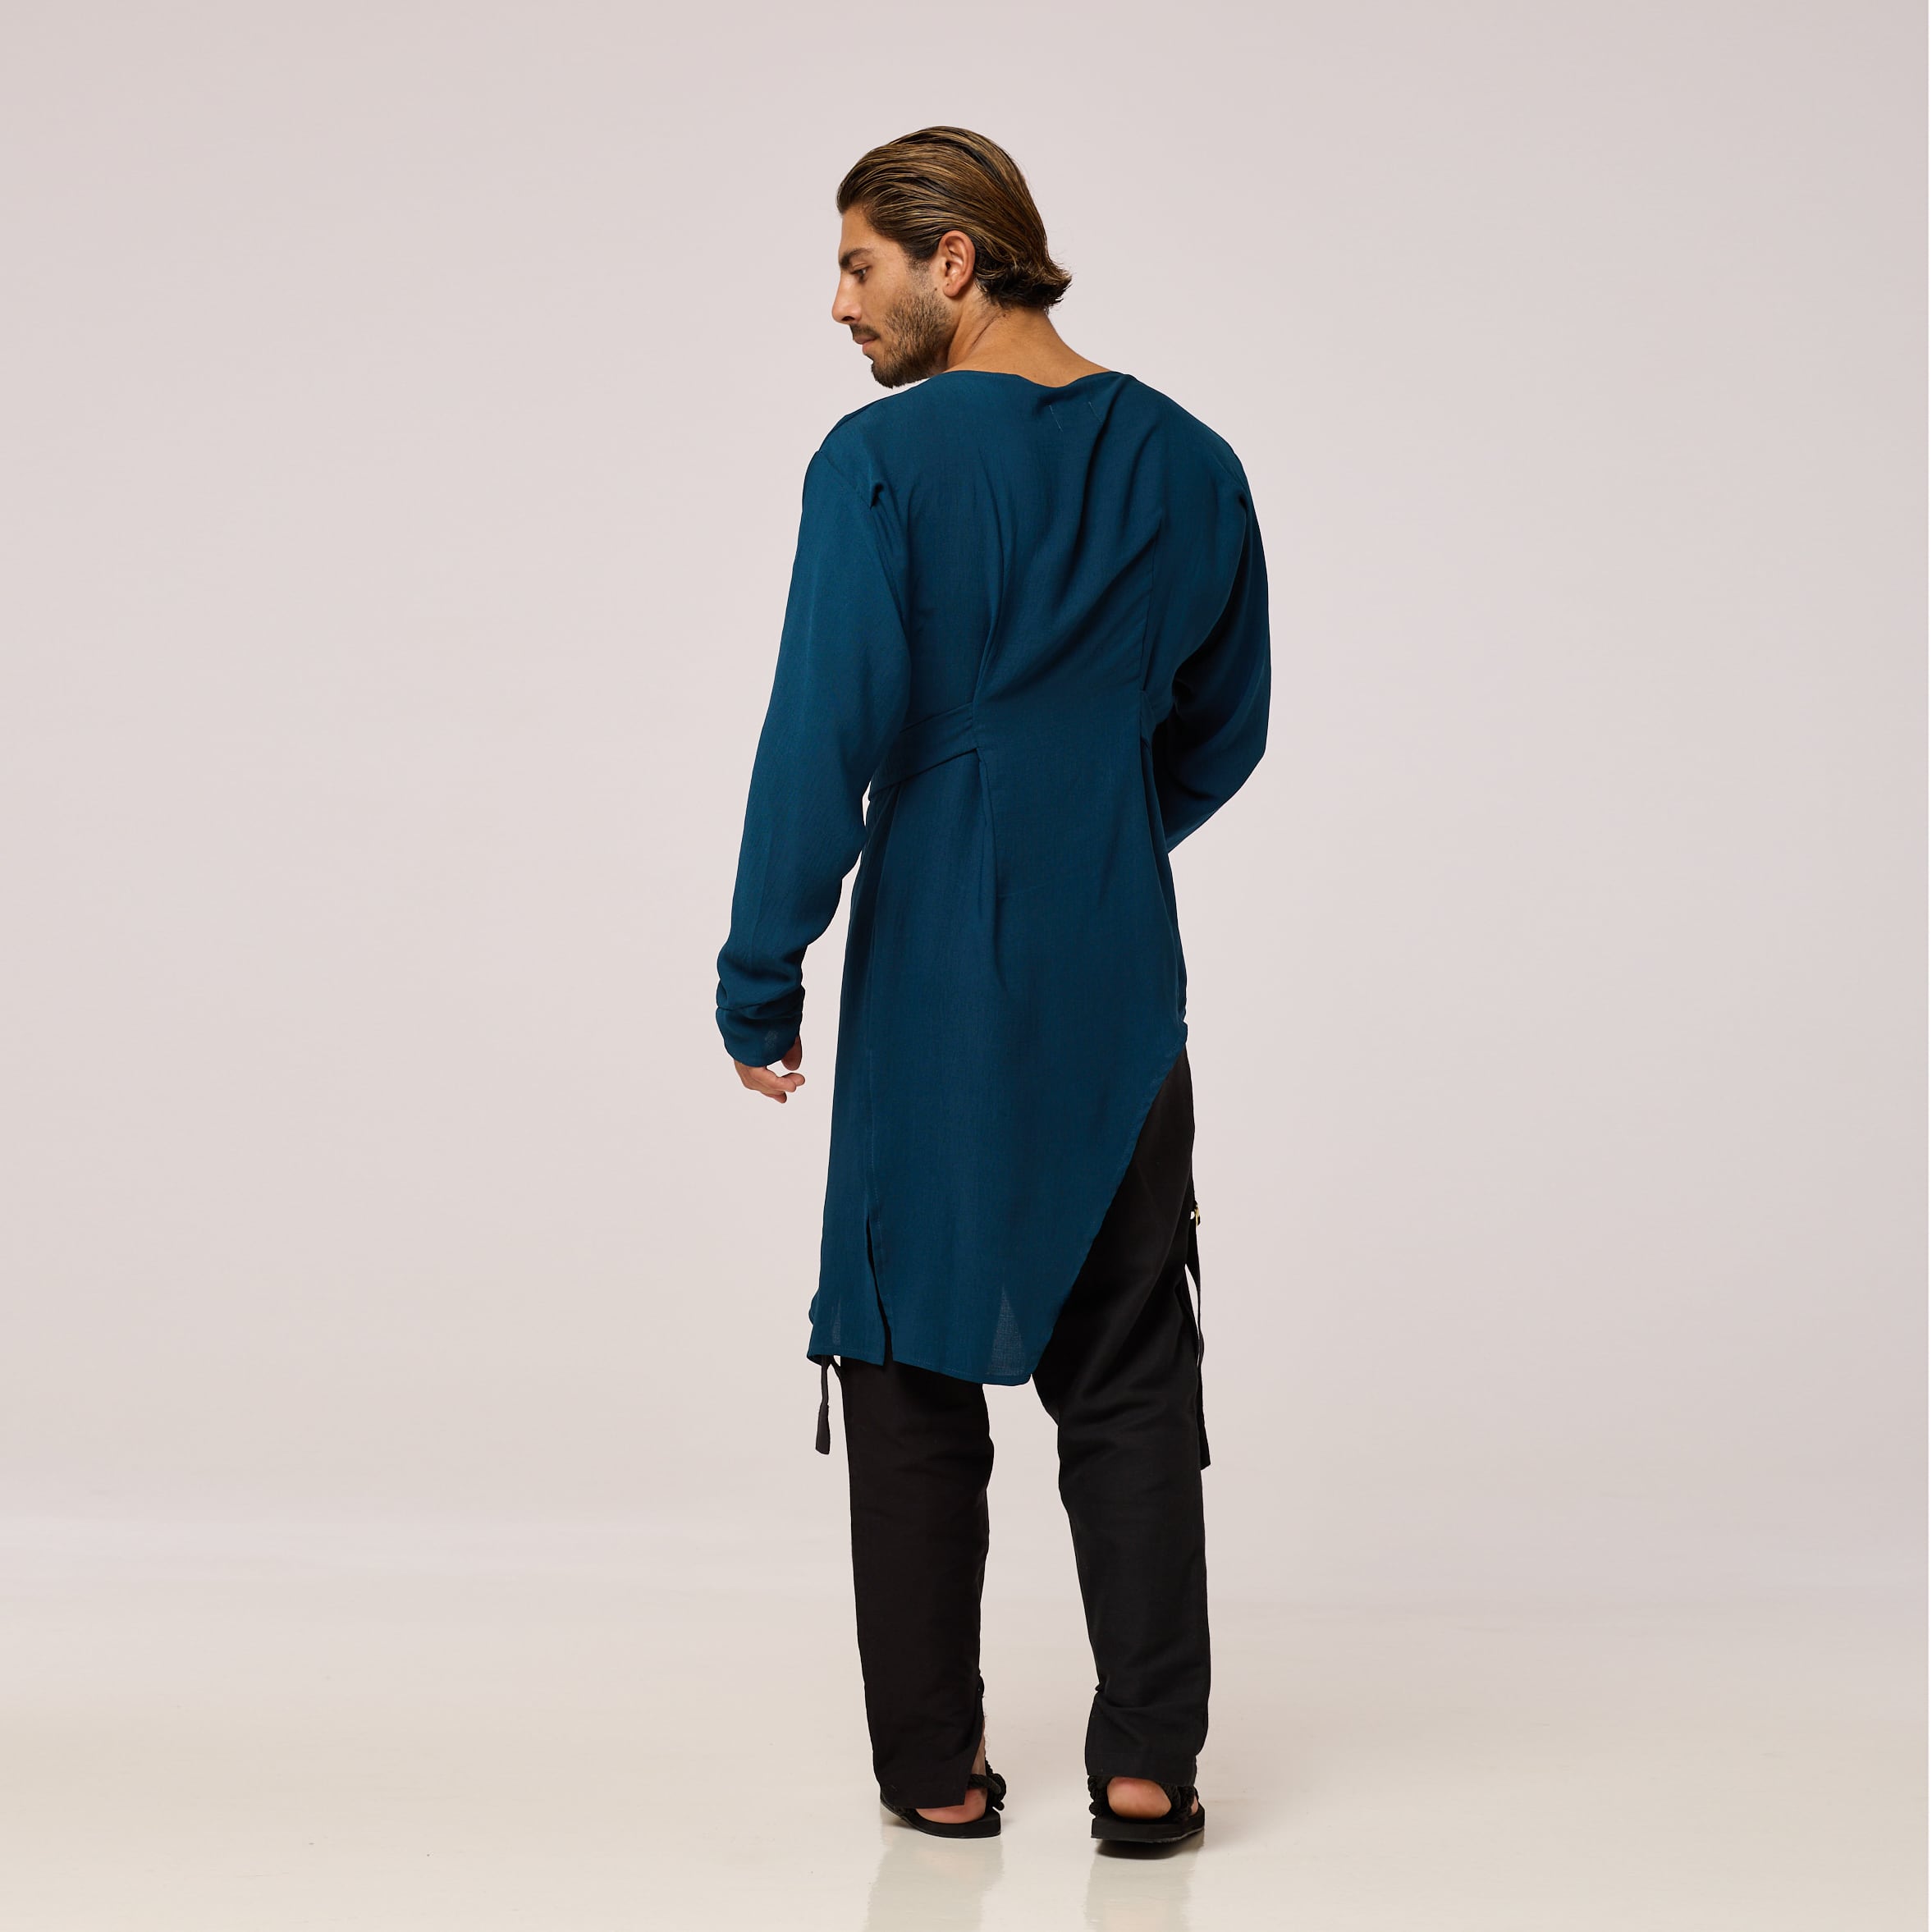 ZERØ London - Back view, mens zero waste long sleeve high/low shirt with bateau neck in teal blue, designed & made in London